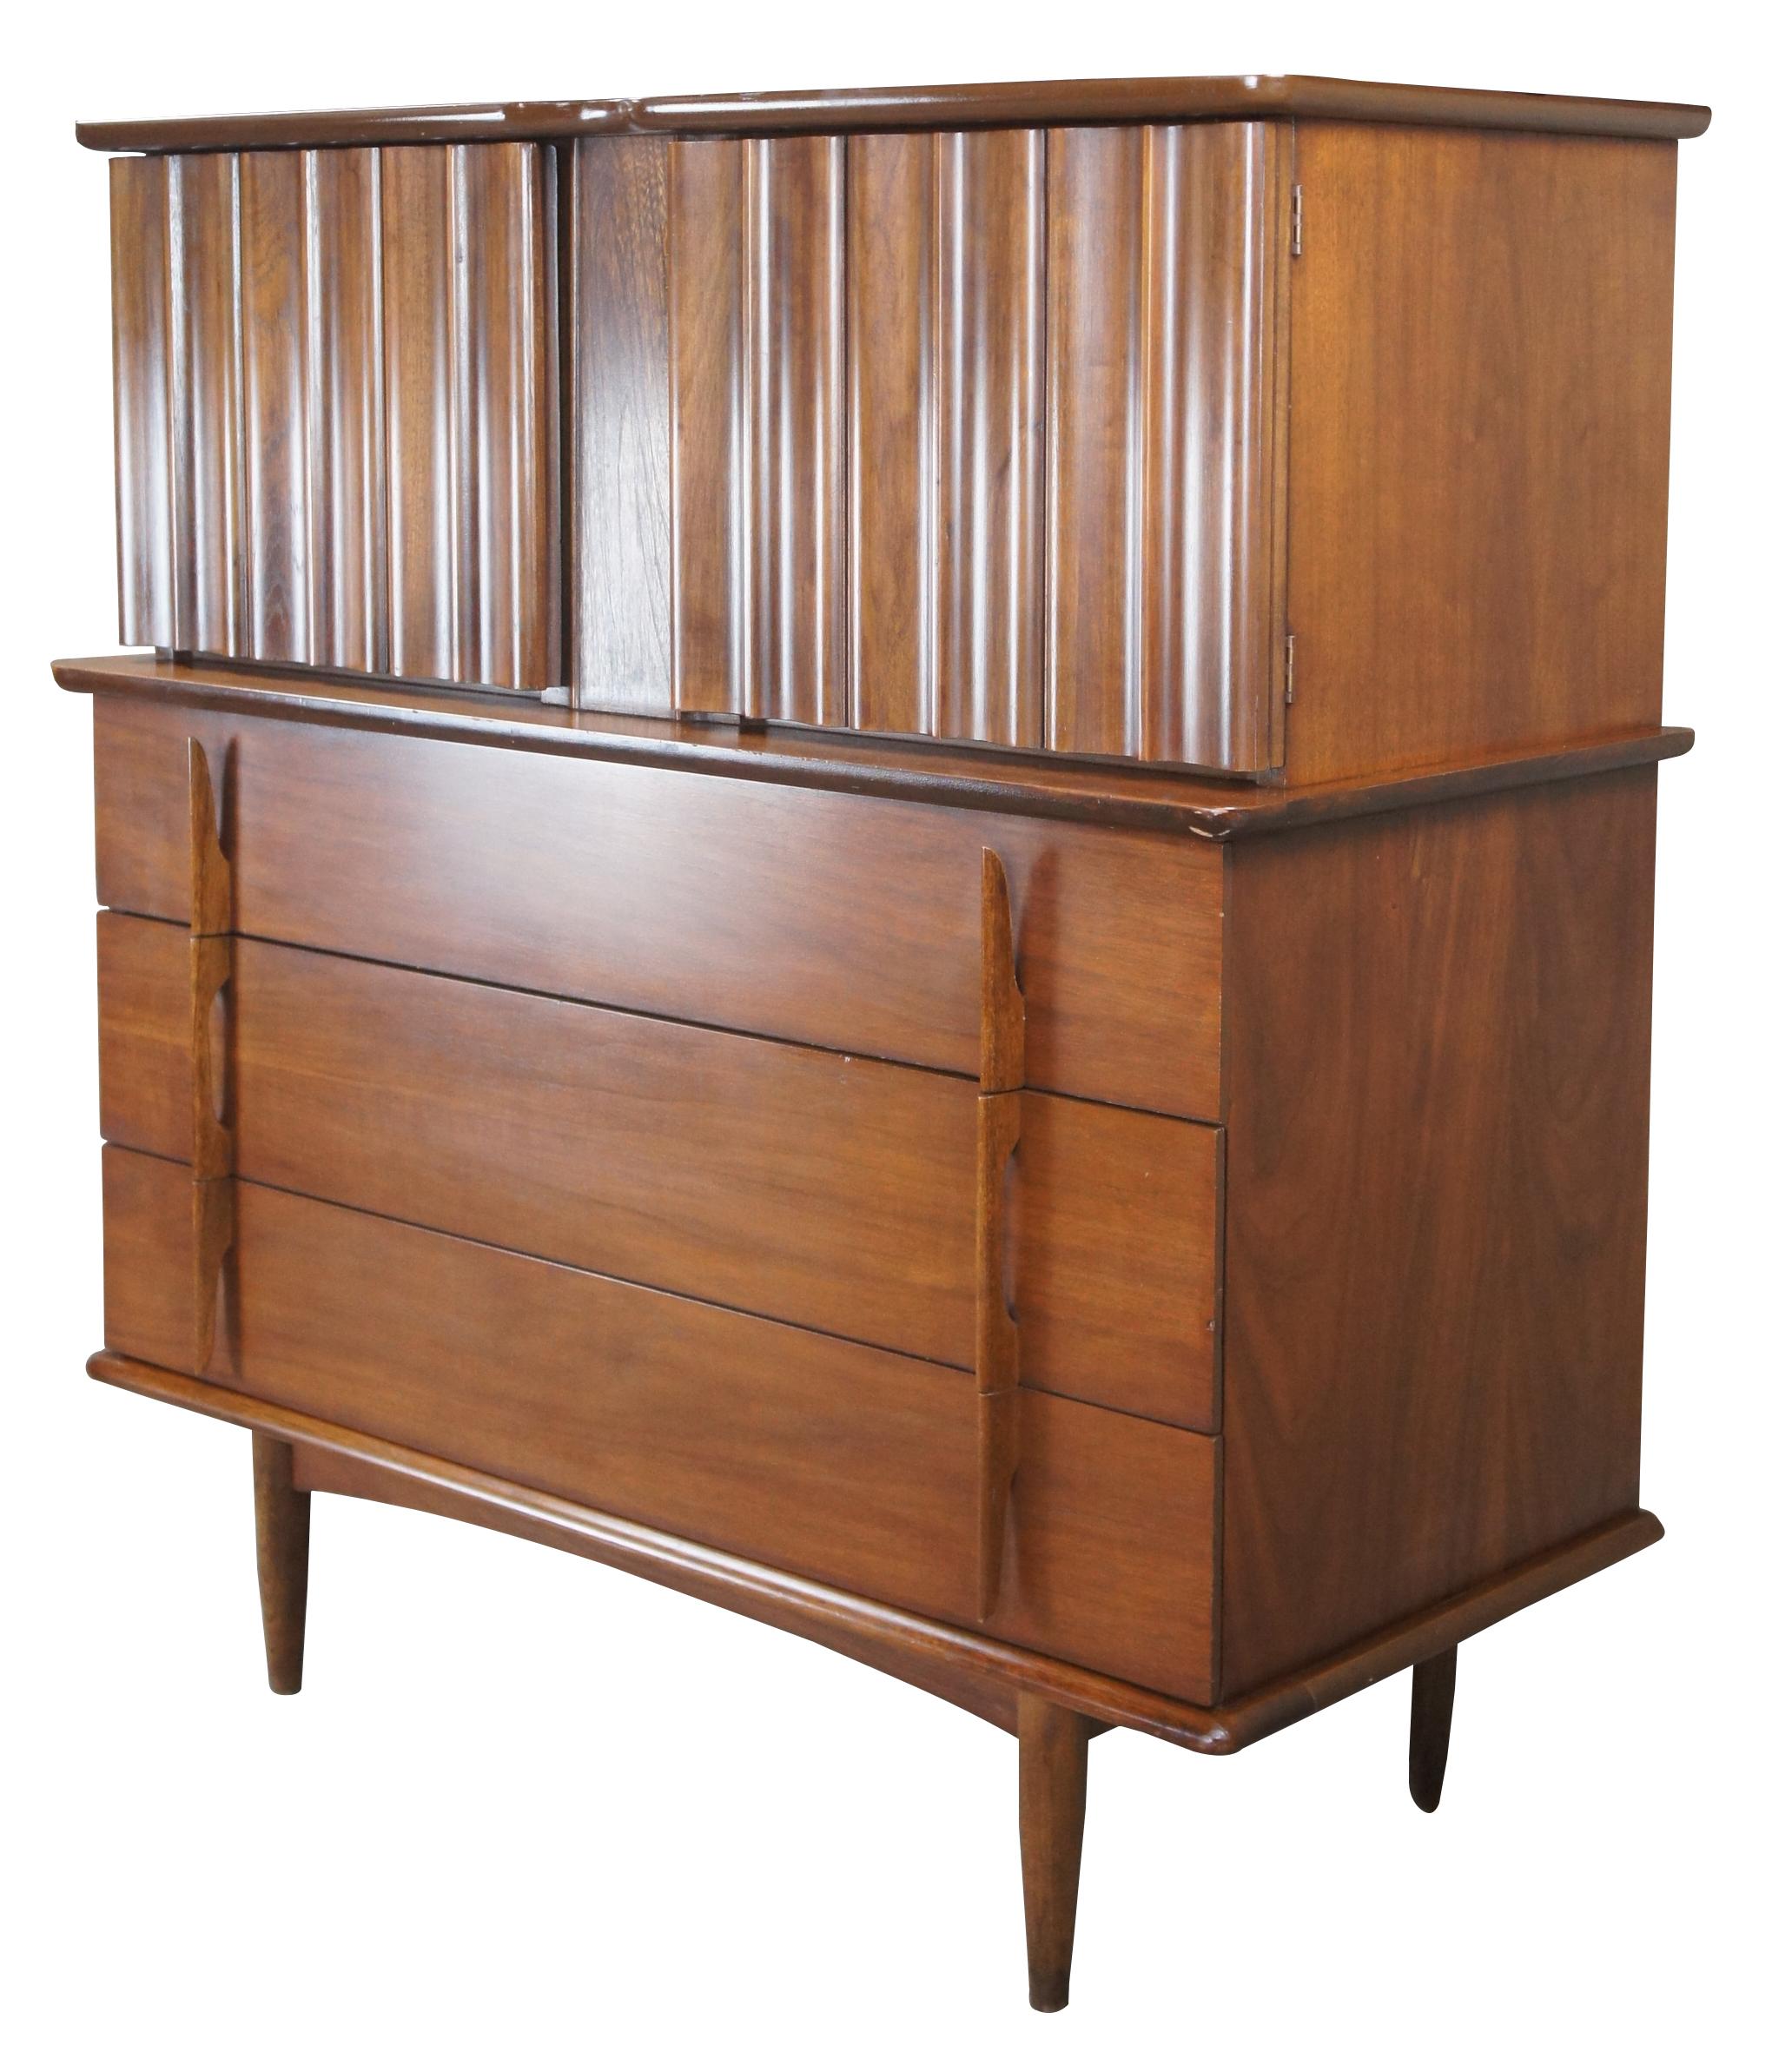 An exceptional Mid-Century Modern dresser by United Furniture Corporation. Made from walnut with a sculptural top that conceals 4 upper drawers. Lower section features three larger drawers wih sculpted drawer pulls. Each drawer is dovetailed and